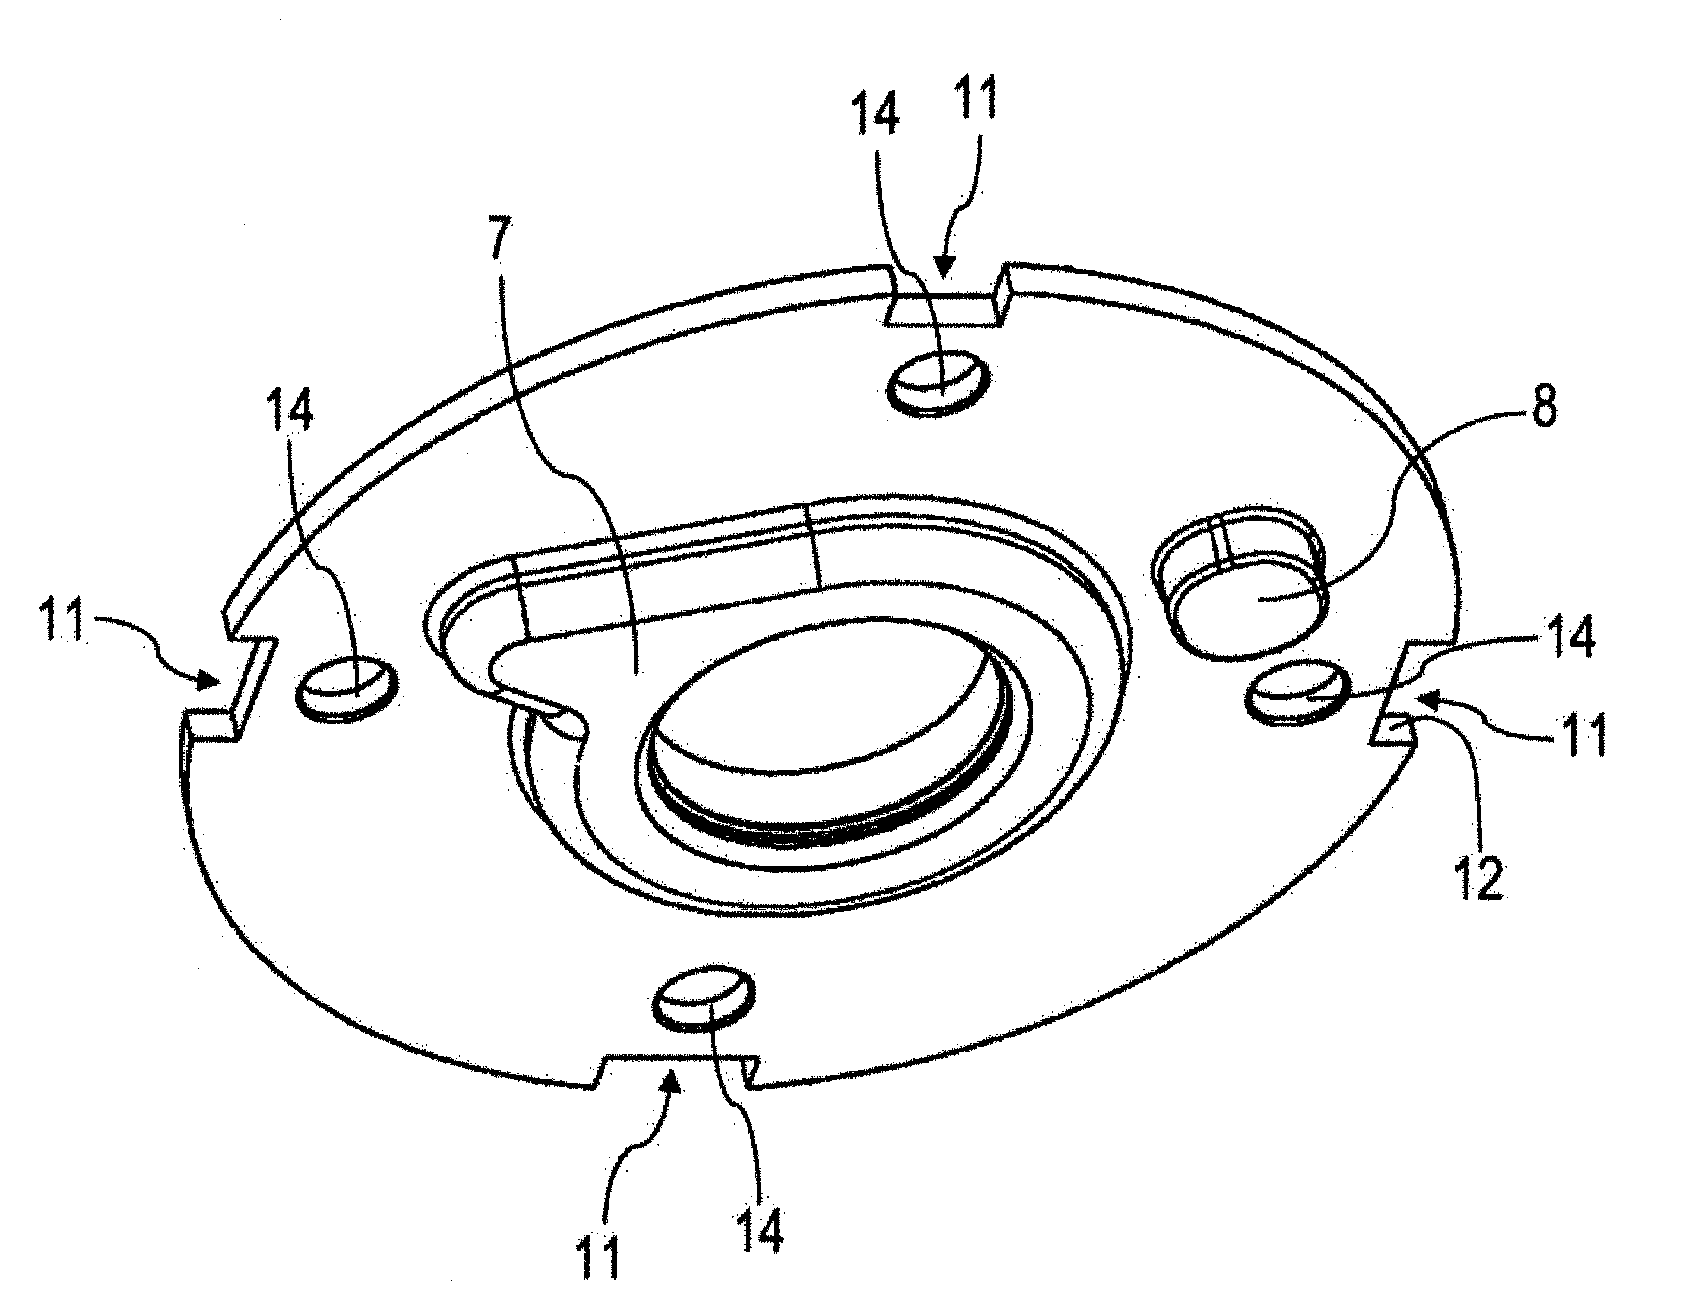 Camshaft adjuster and stator cover unit for automatic adjustment of a locking device